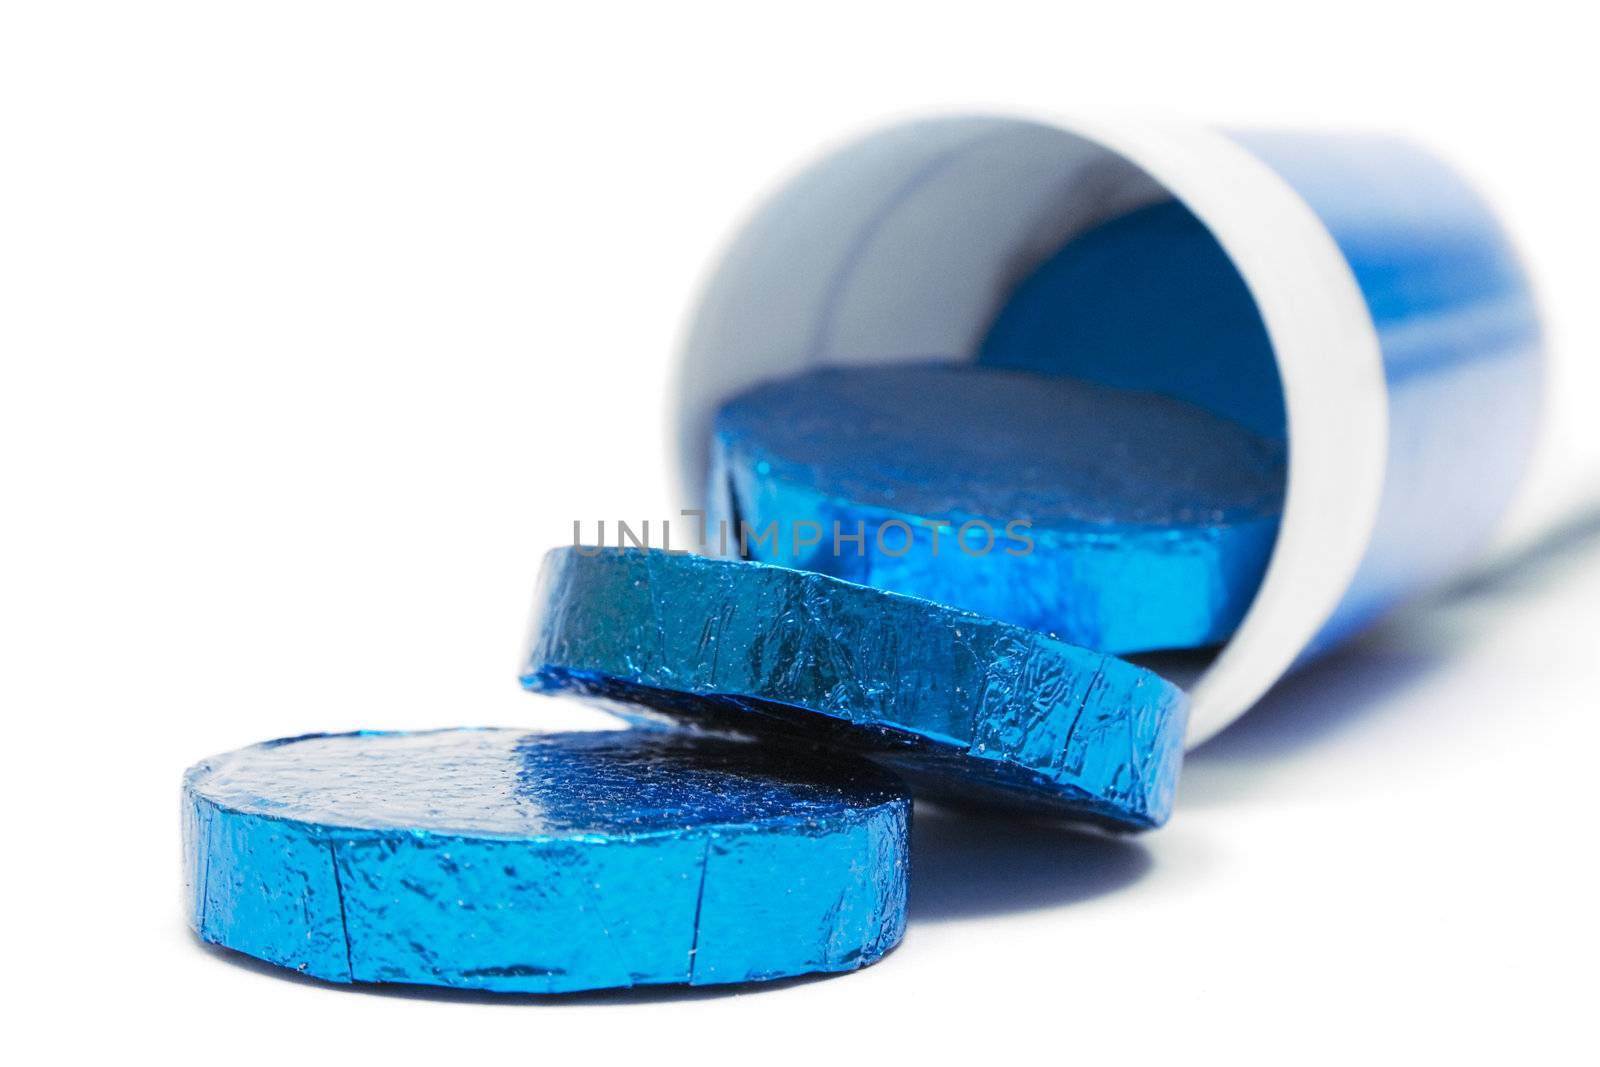 Wrapped pills in a plastic container. Isolated on a white background.